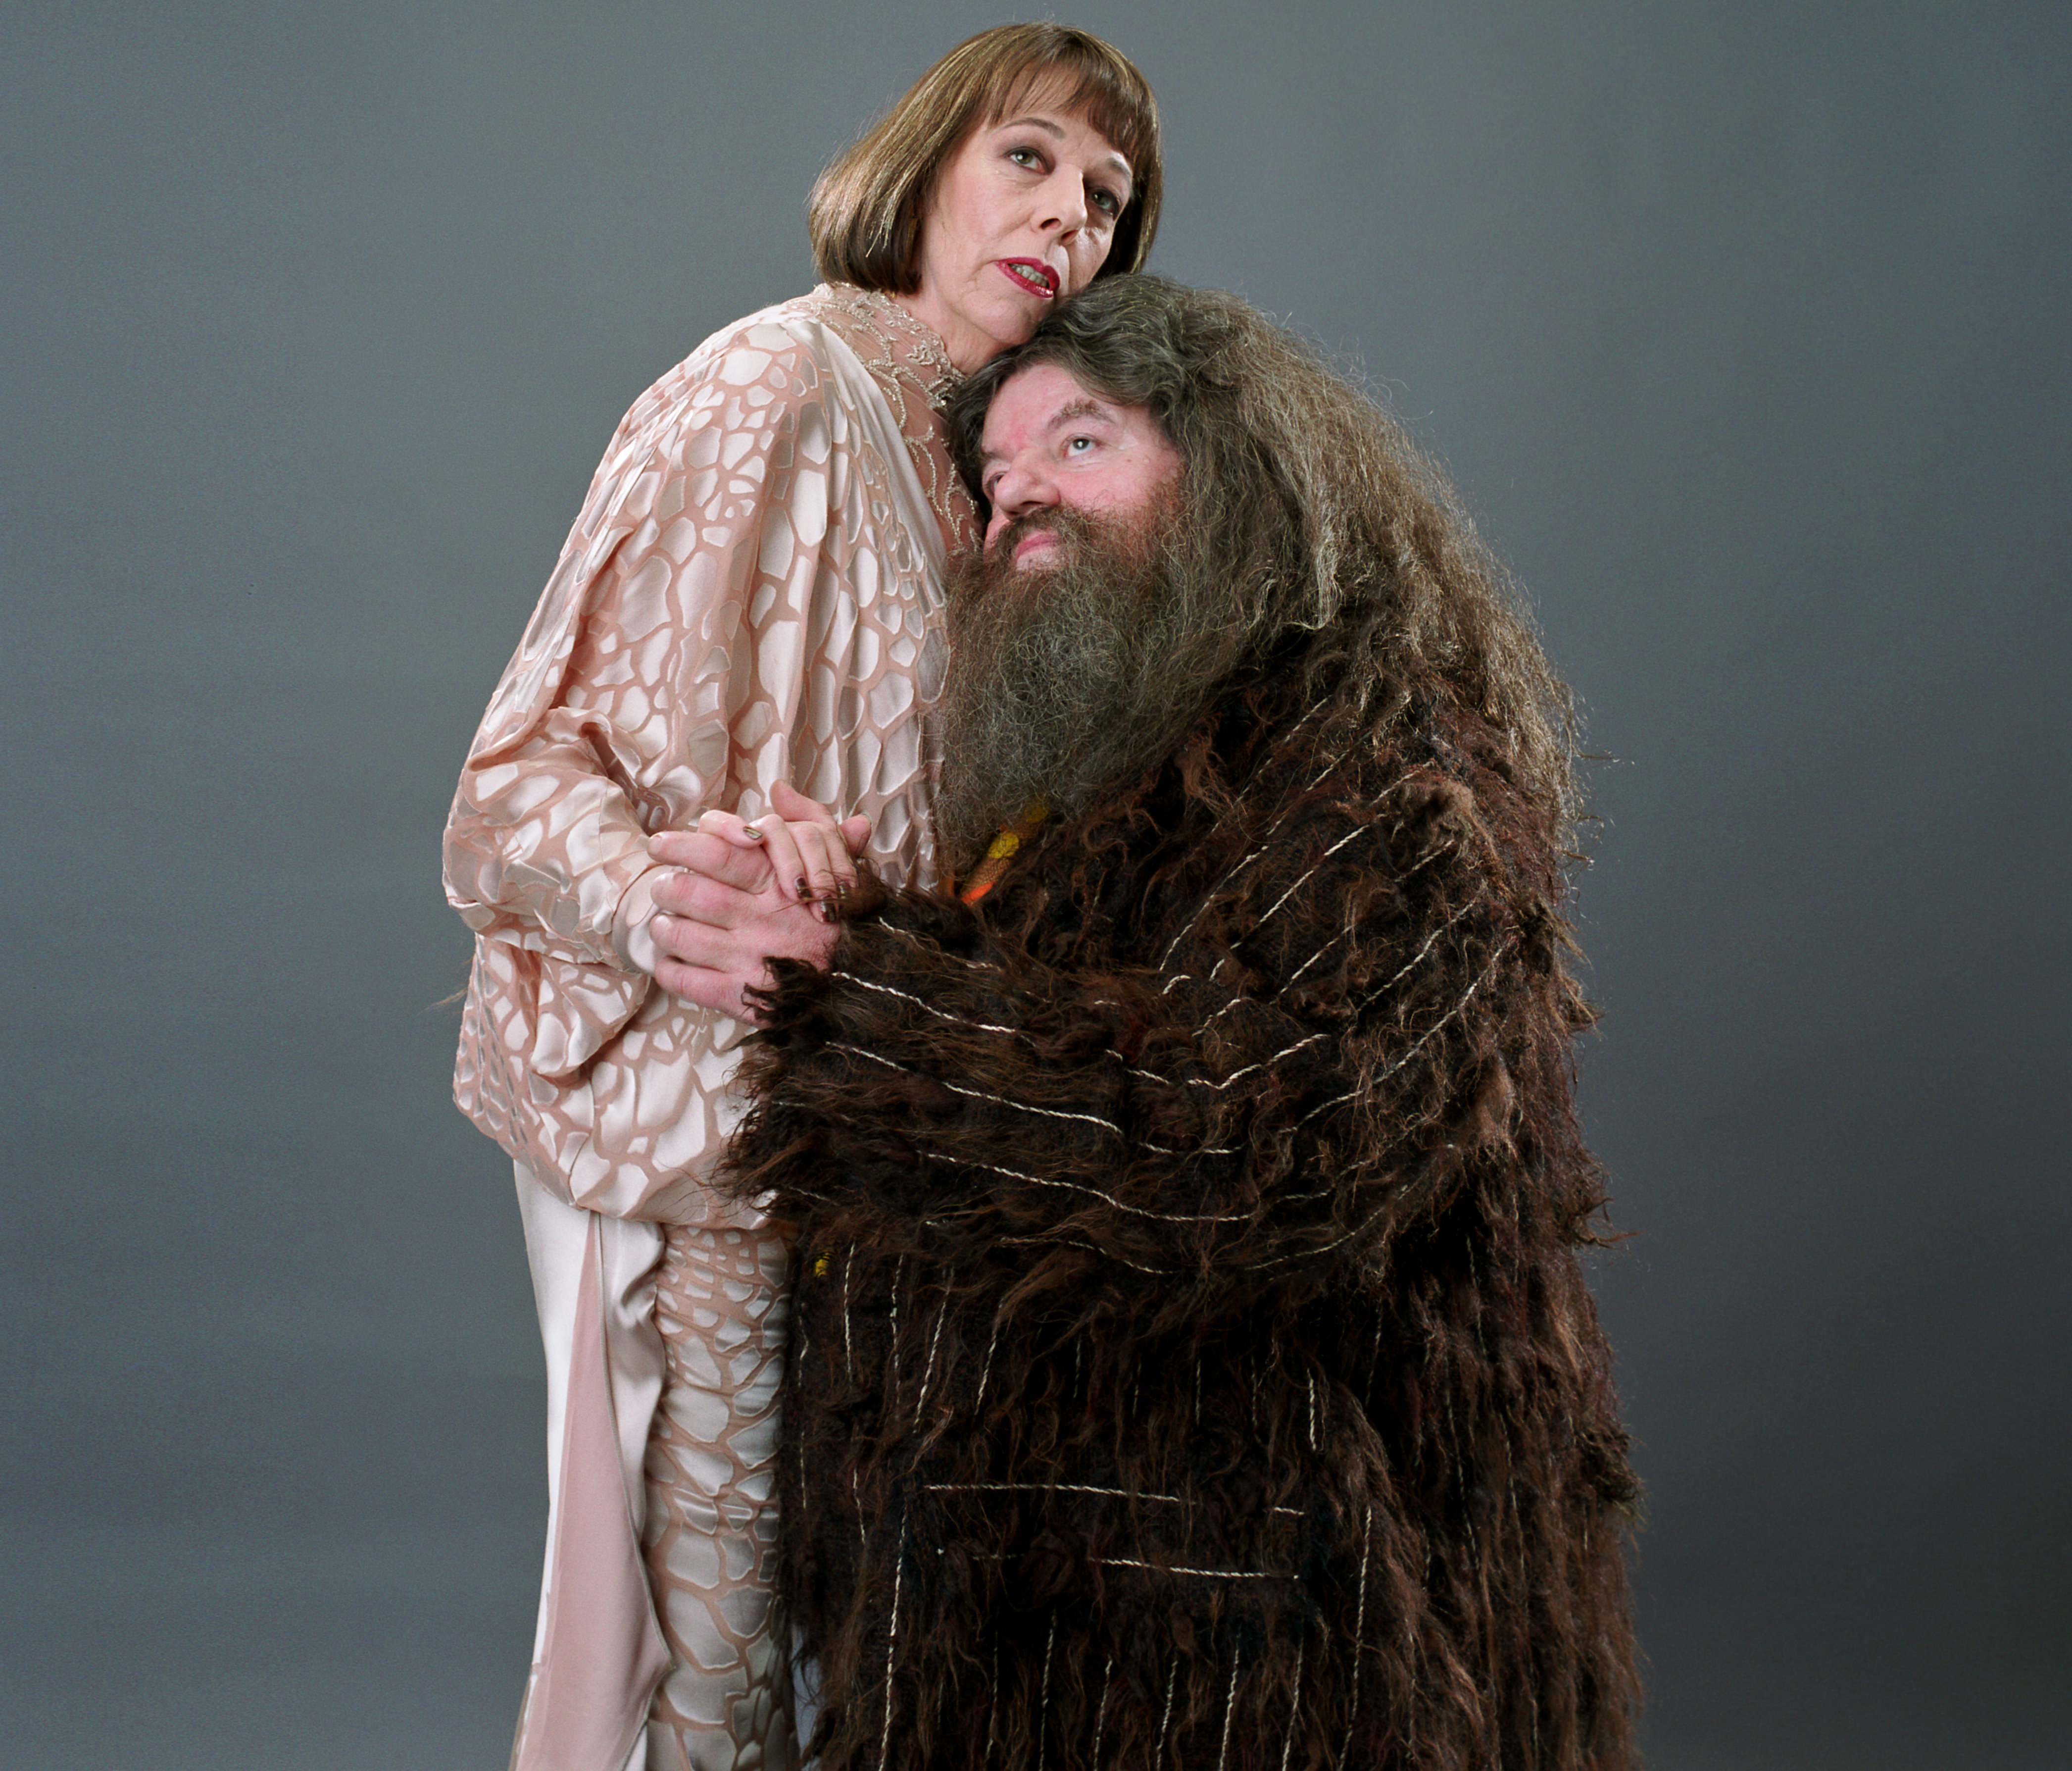 Who is the Giant Hagrid befriends?